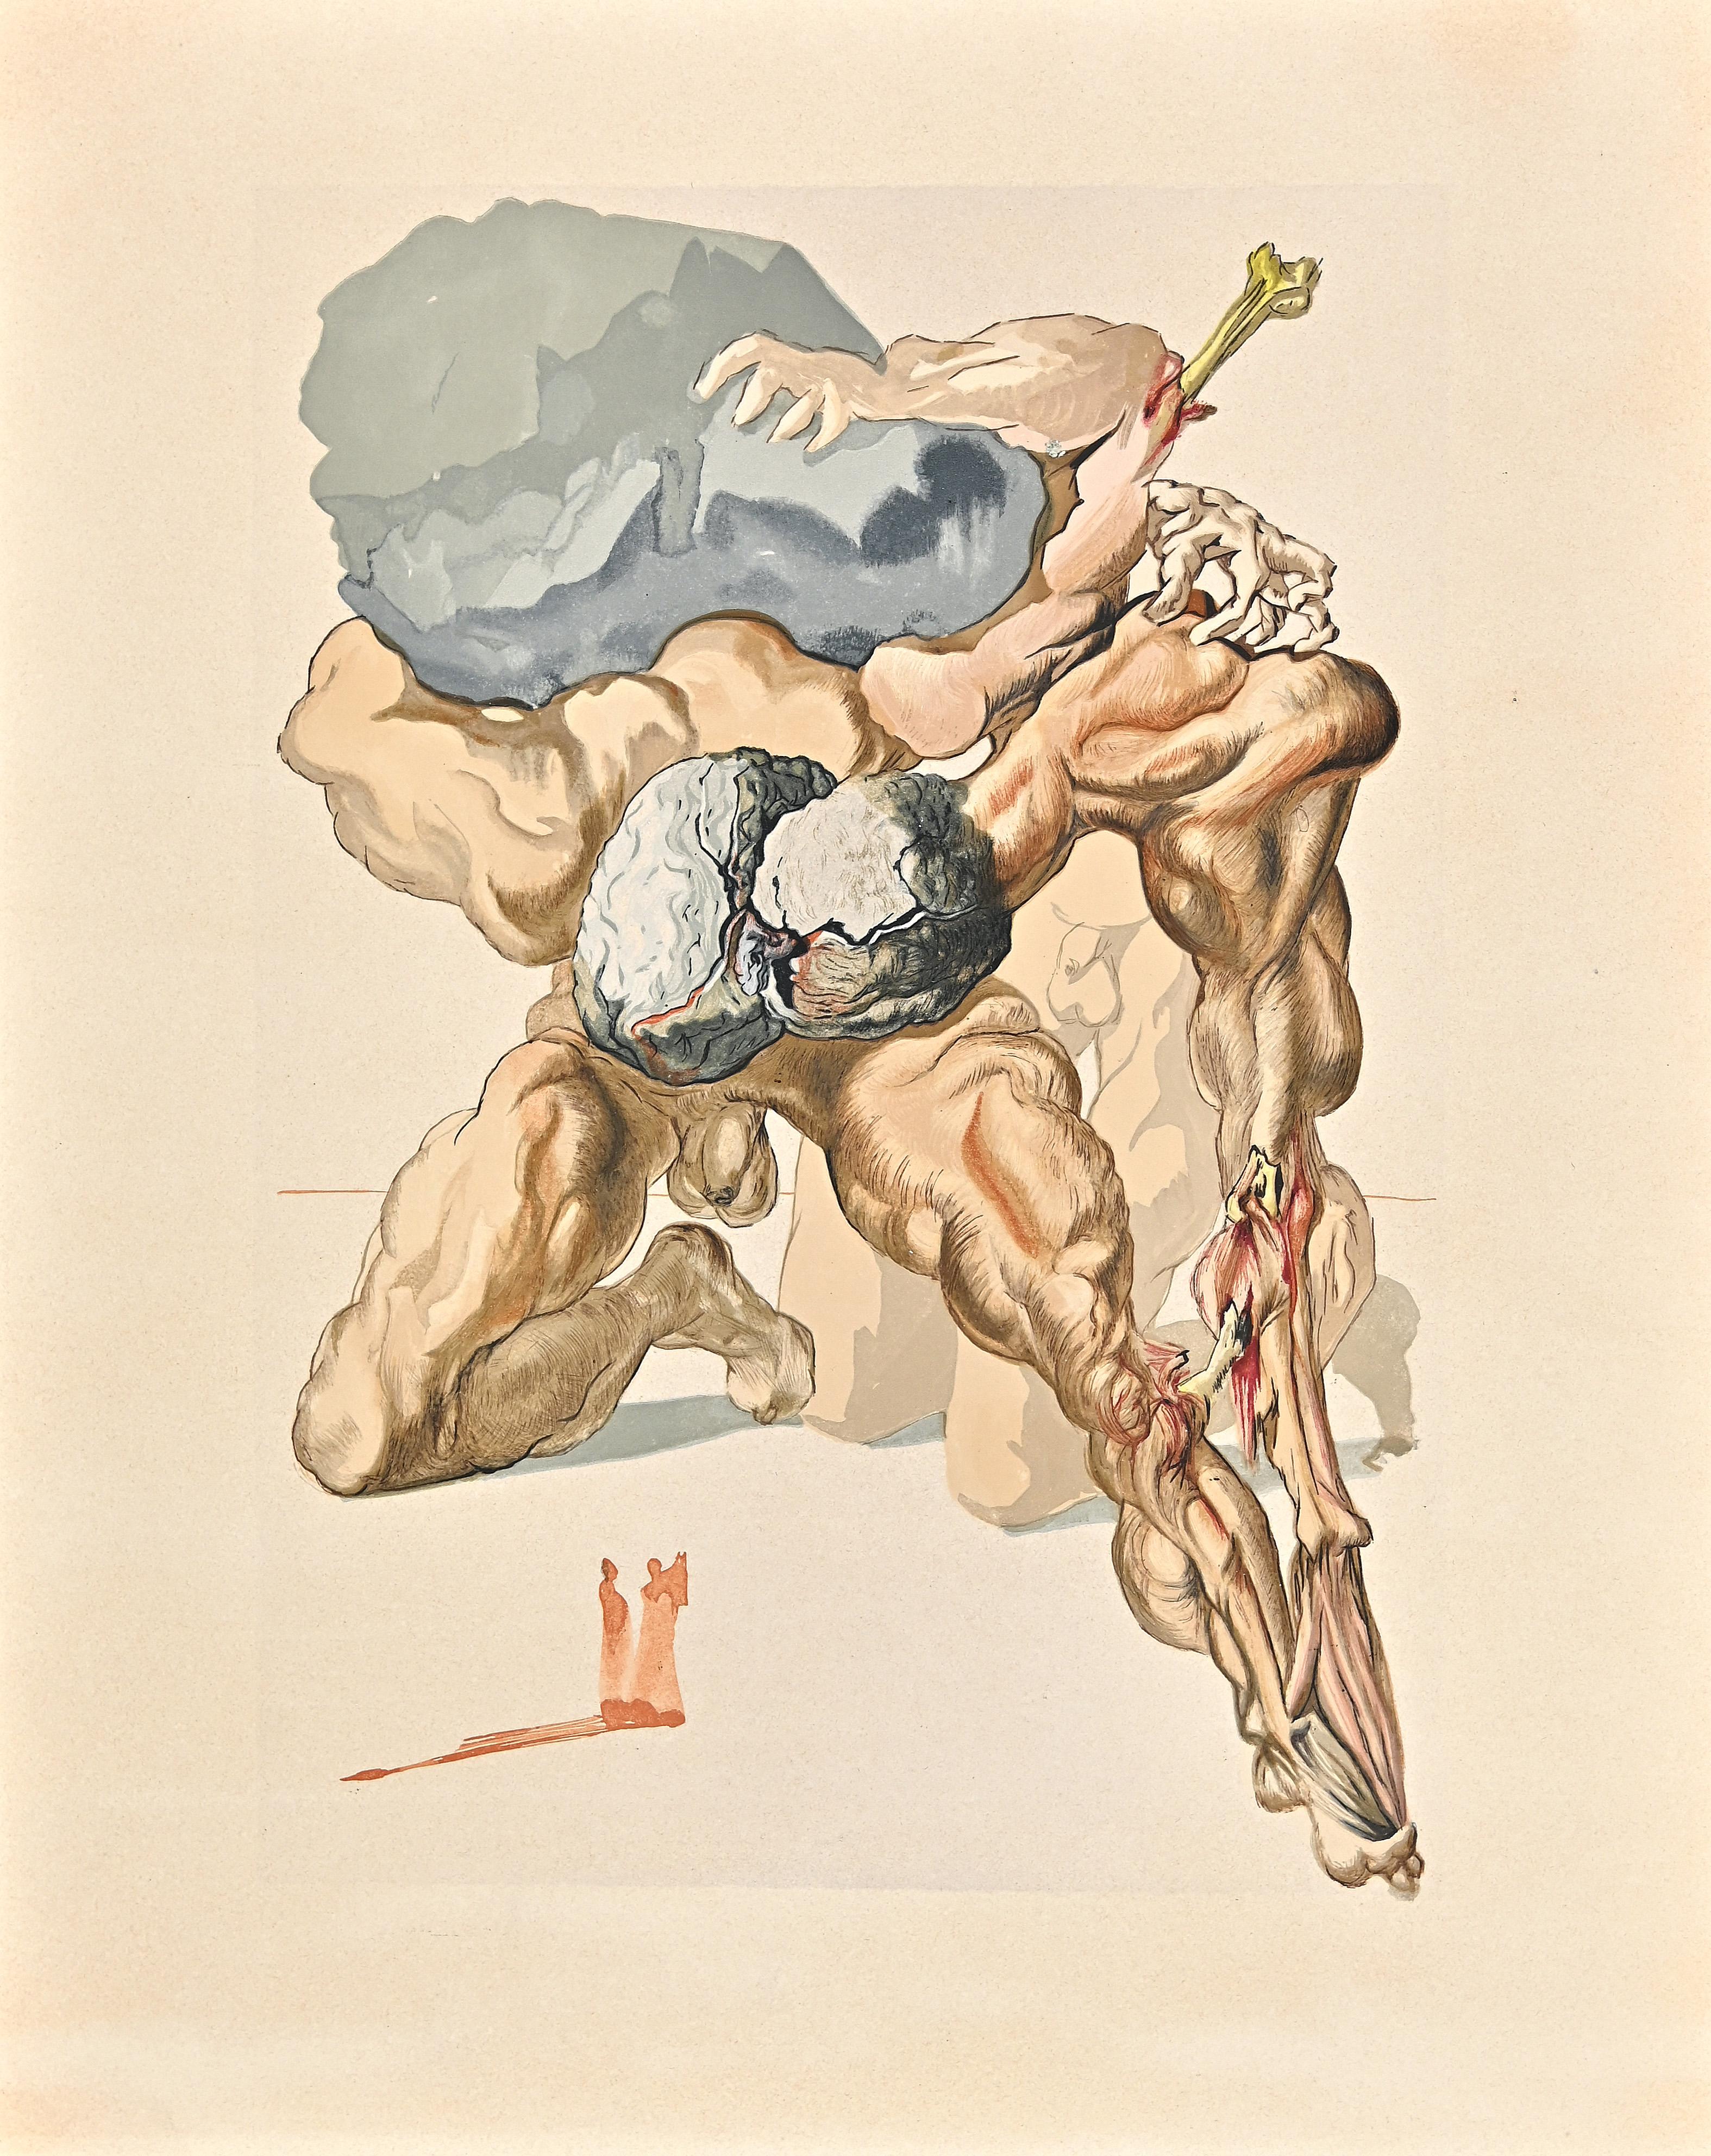 Salvador Dalí Figurative Print - The Avaricious and the Prodigal - Woodcut Print attr. to S. Dalì - 1963